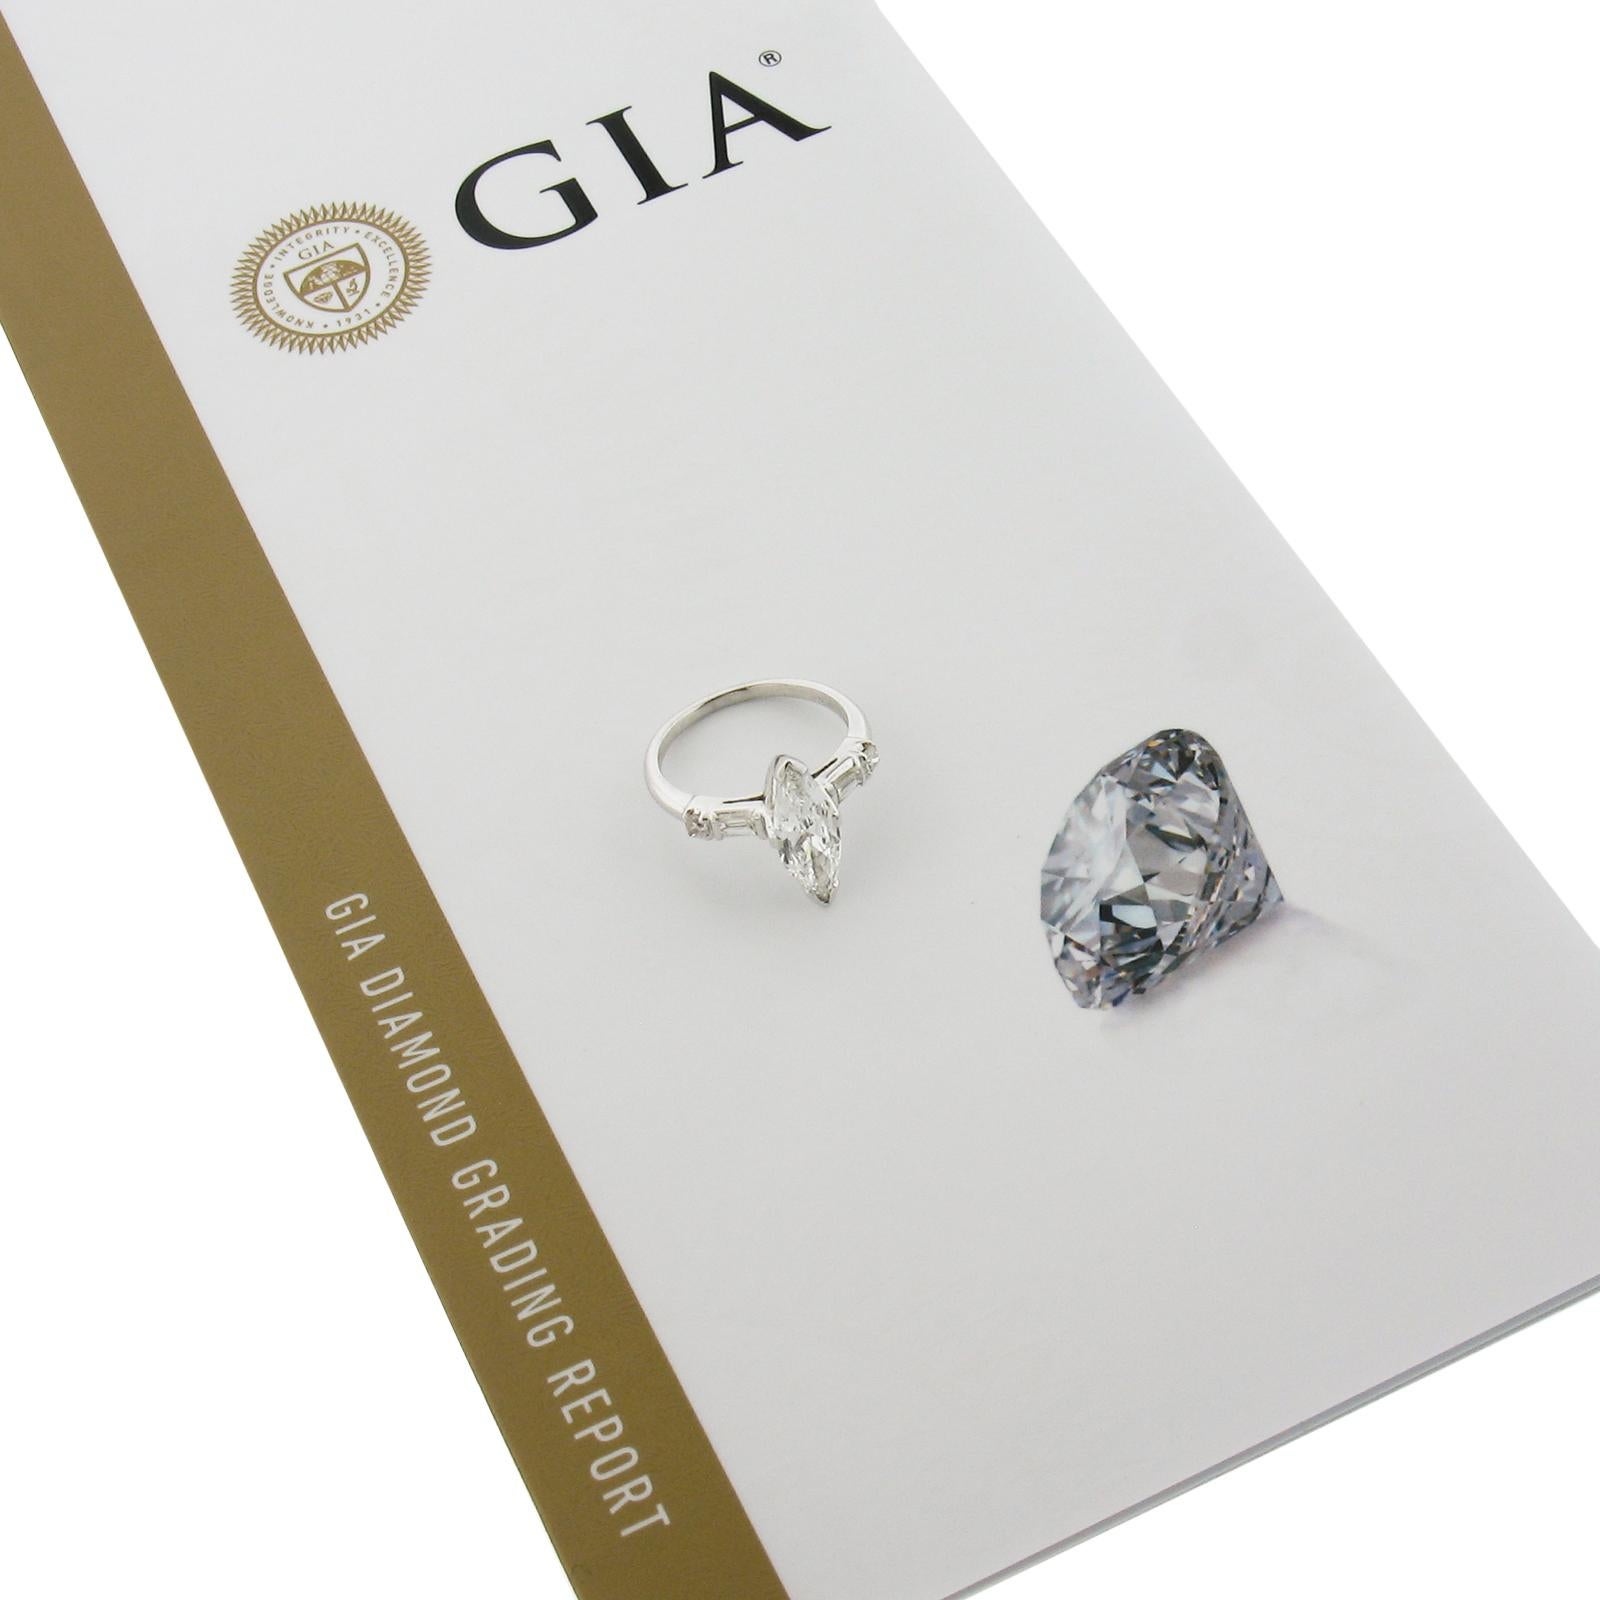 --Stone(s):--
(1) Natural Genuine Diamond - Marquise Brilliant Cut - V Prong Set - F Color - VS1 Clarity - Long 2.16 Ratio - 1.16ct (exact - certified)
** See Certification Details Below for Complete Info **
(2) Natural Genuine Diamonds - Tapered